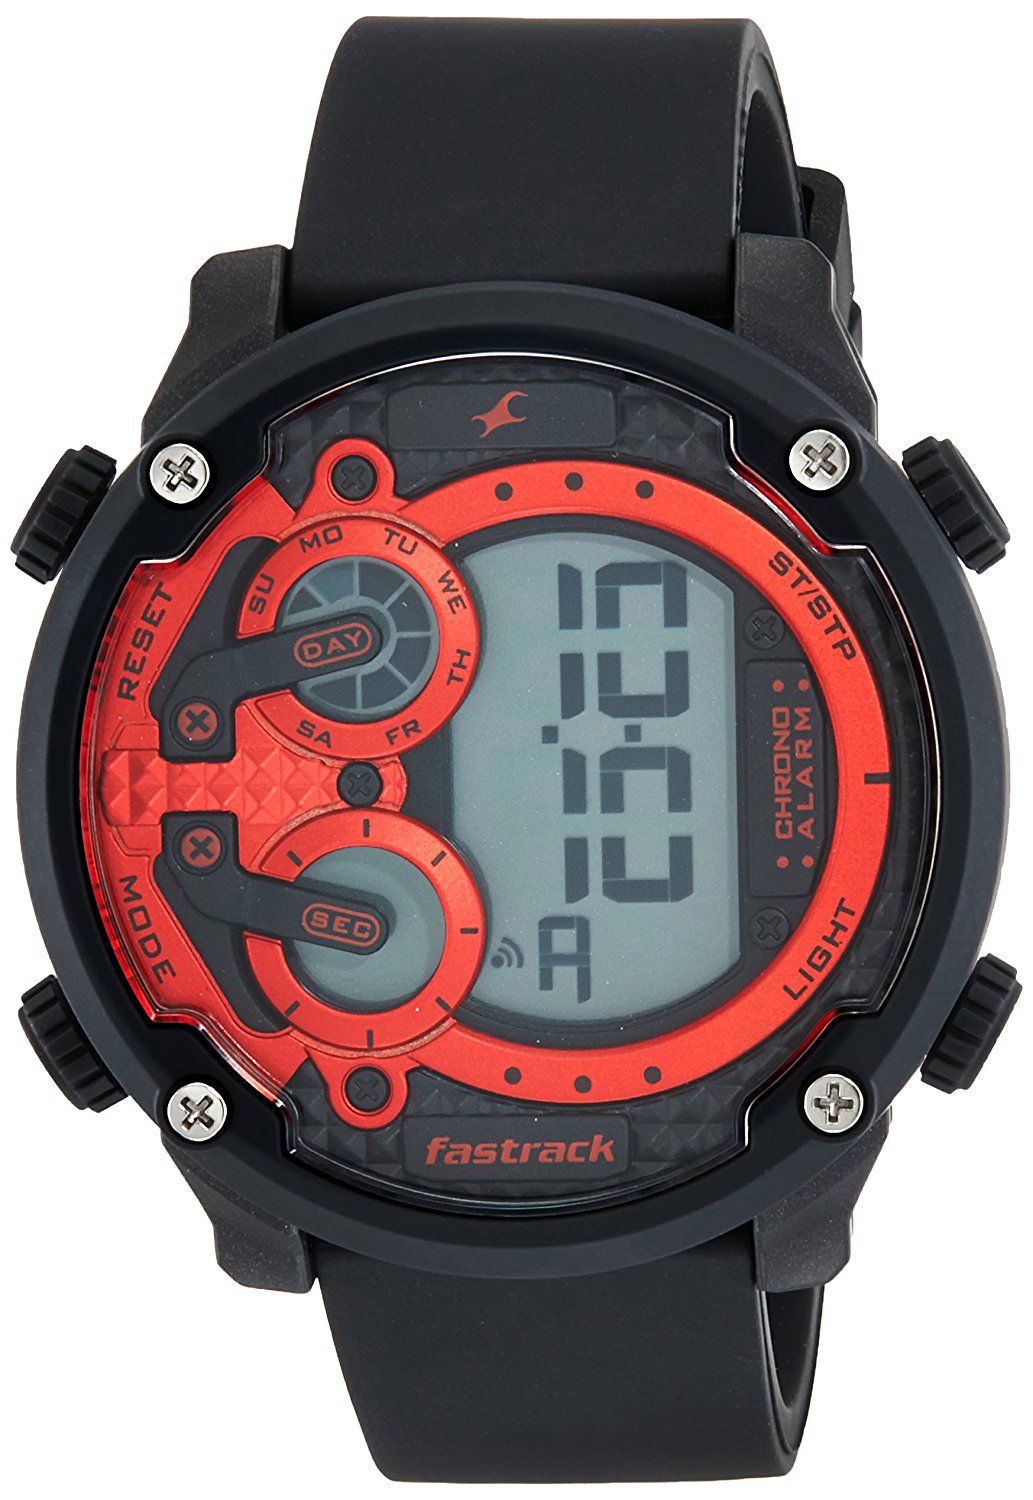 Fastrack 38045pp01 Silicon Digital - Buy Fastrack 38045pp01 Silicon Digital Online at Best 